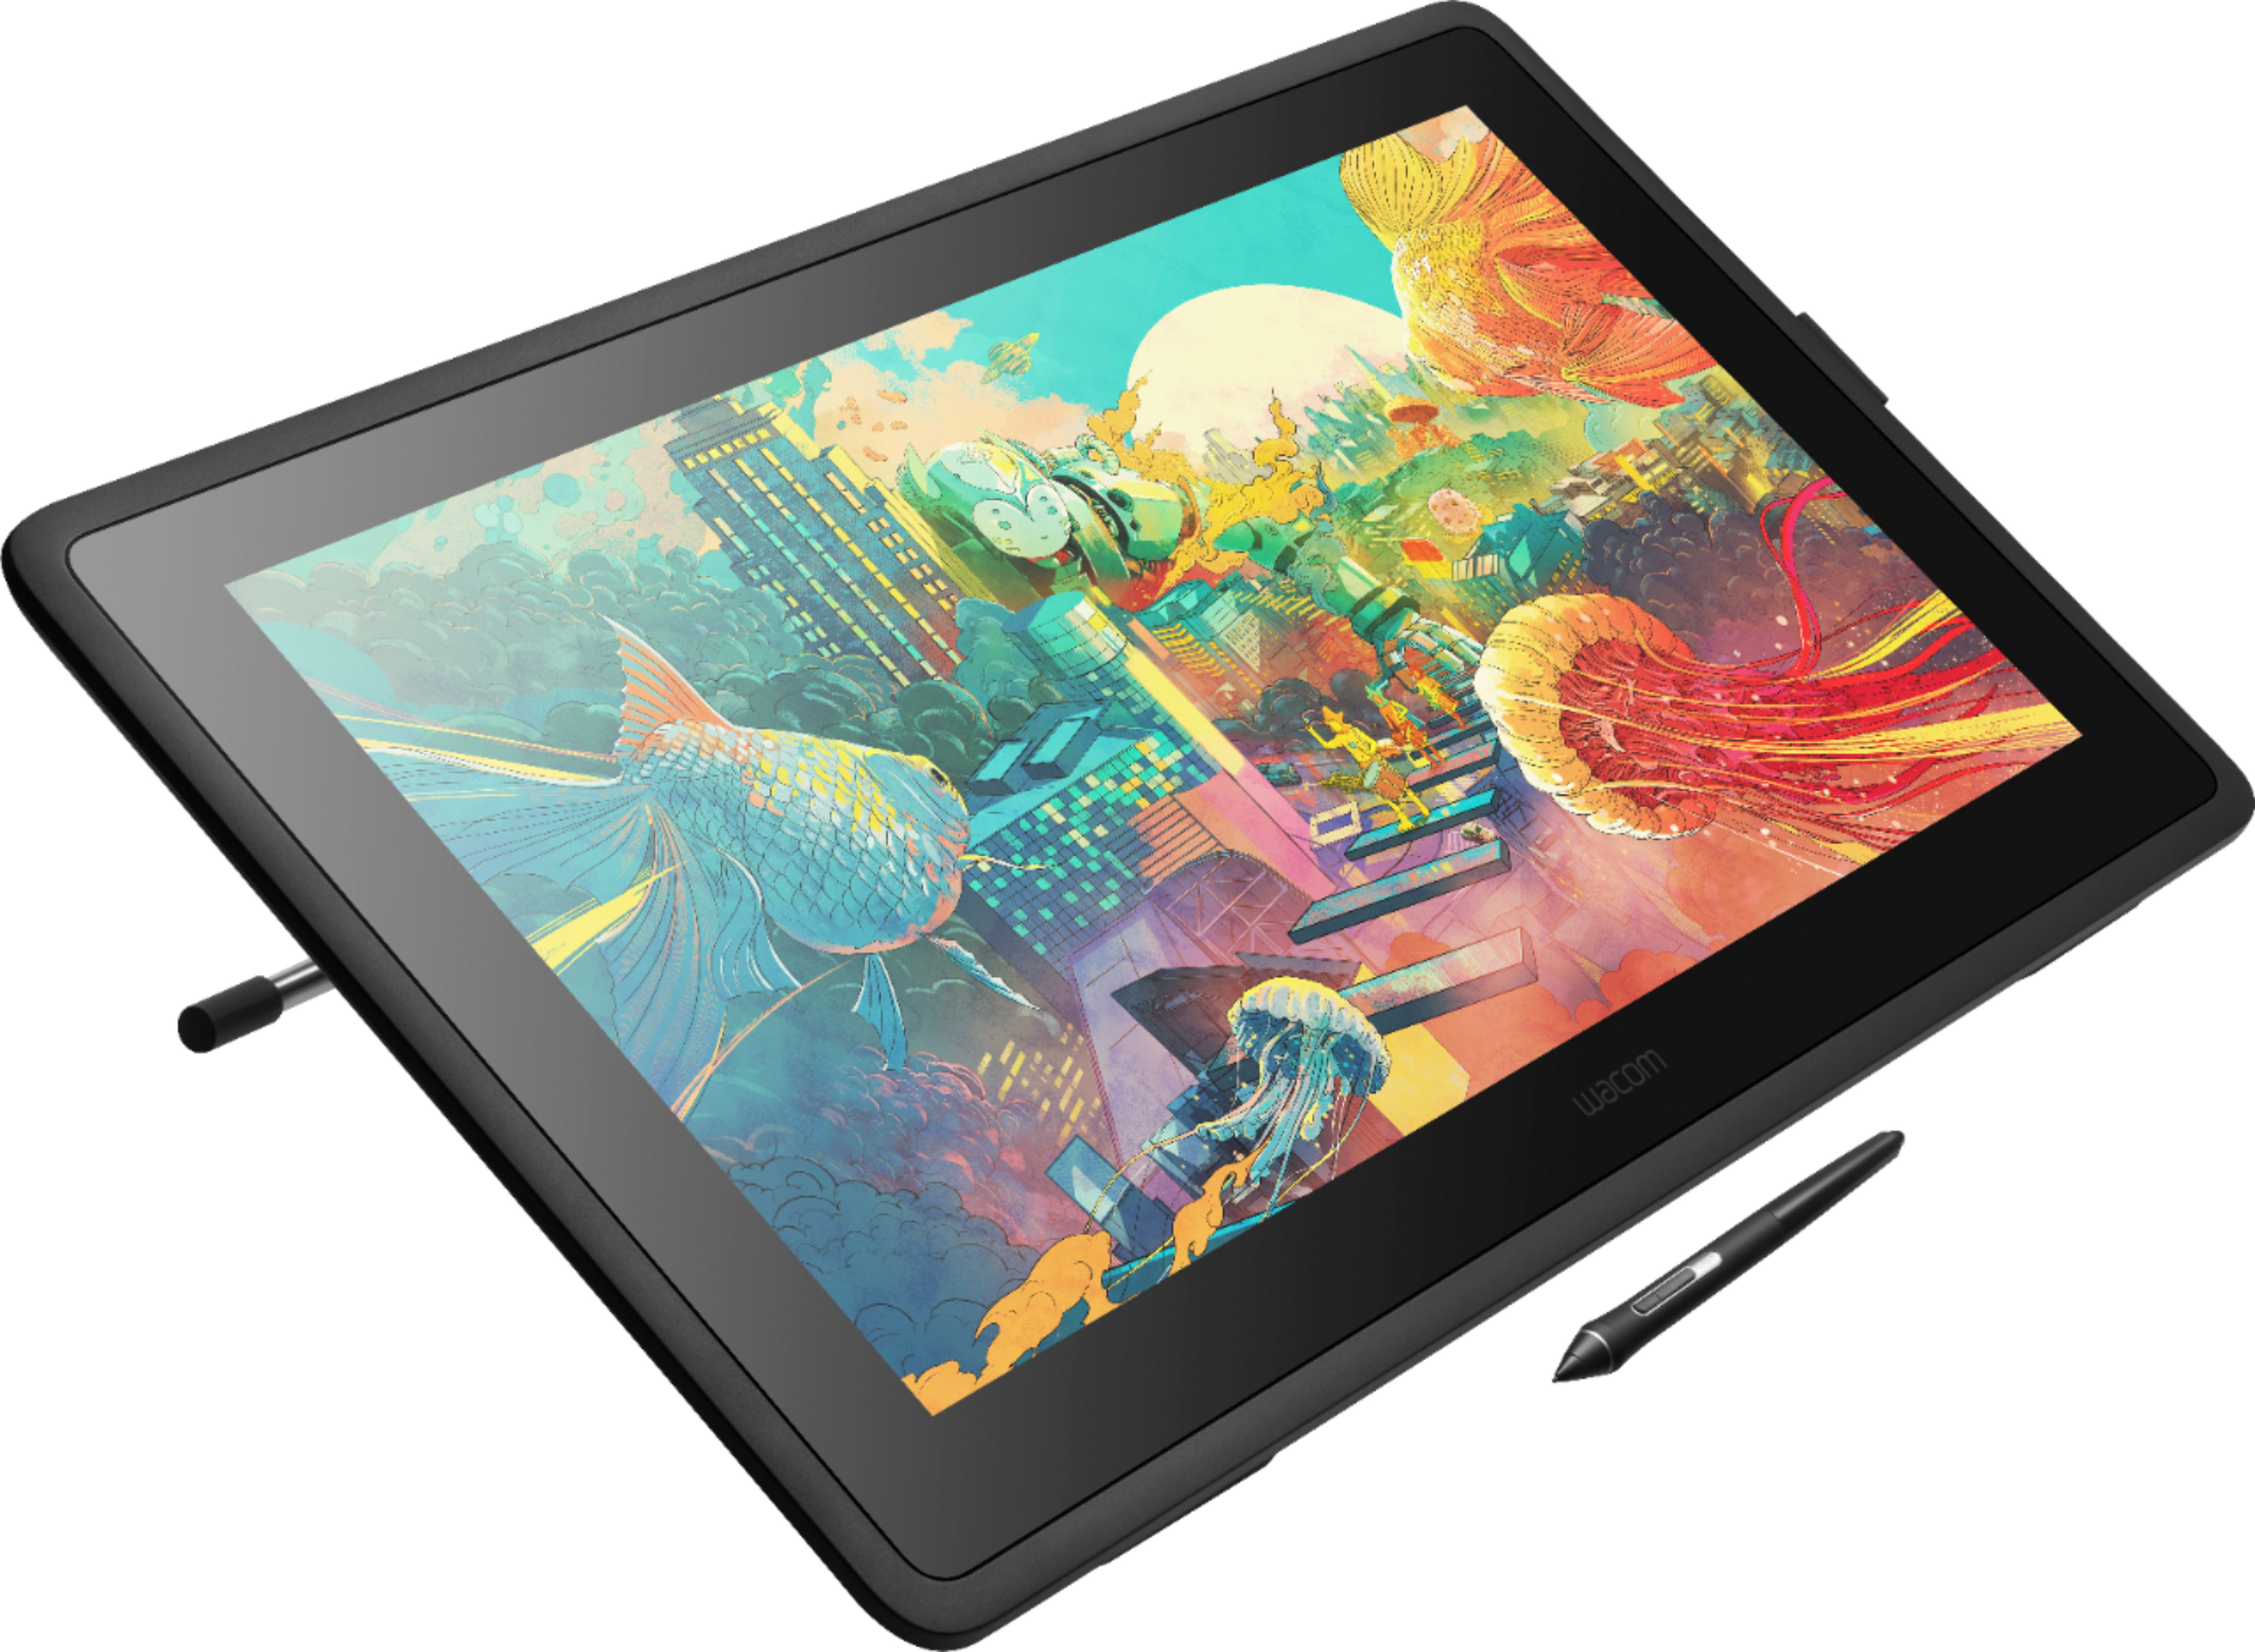 Angle View: iskn - The Slate 2+ - Drawing Tablet - 4GB Storage Capacity - Black Matte